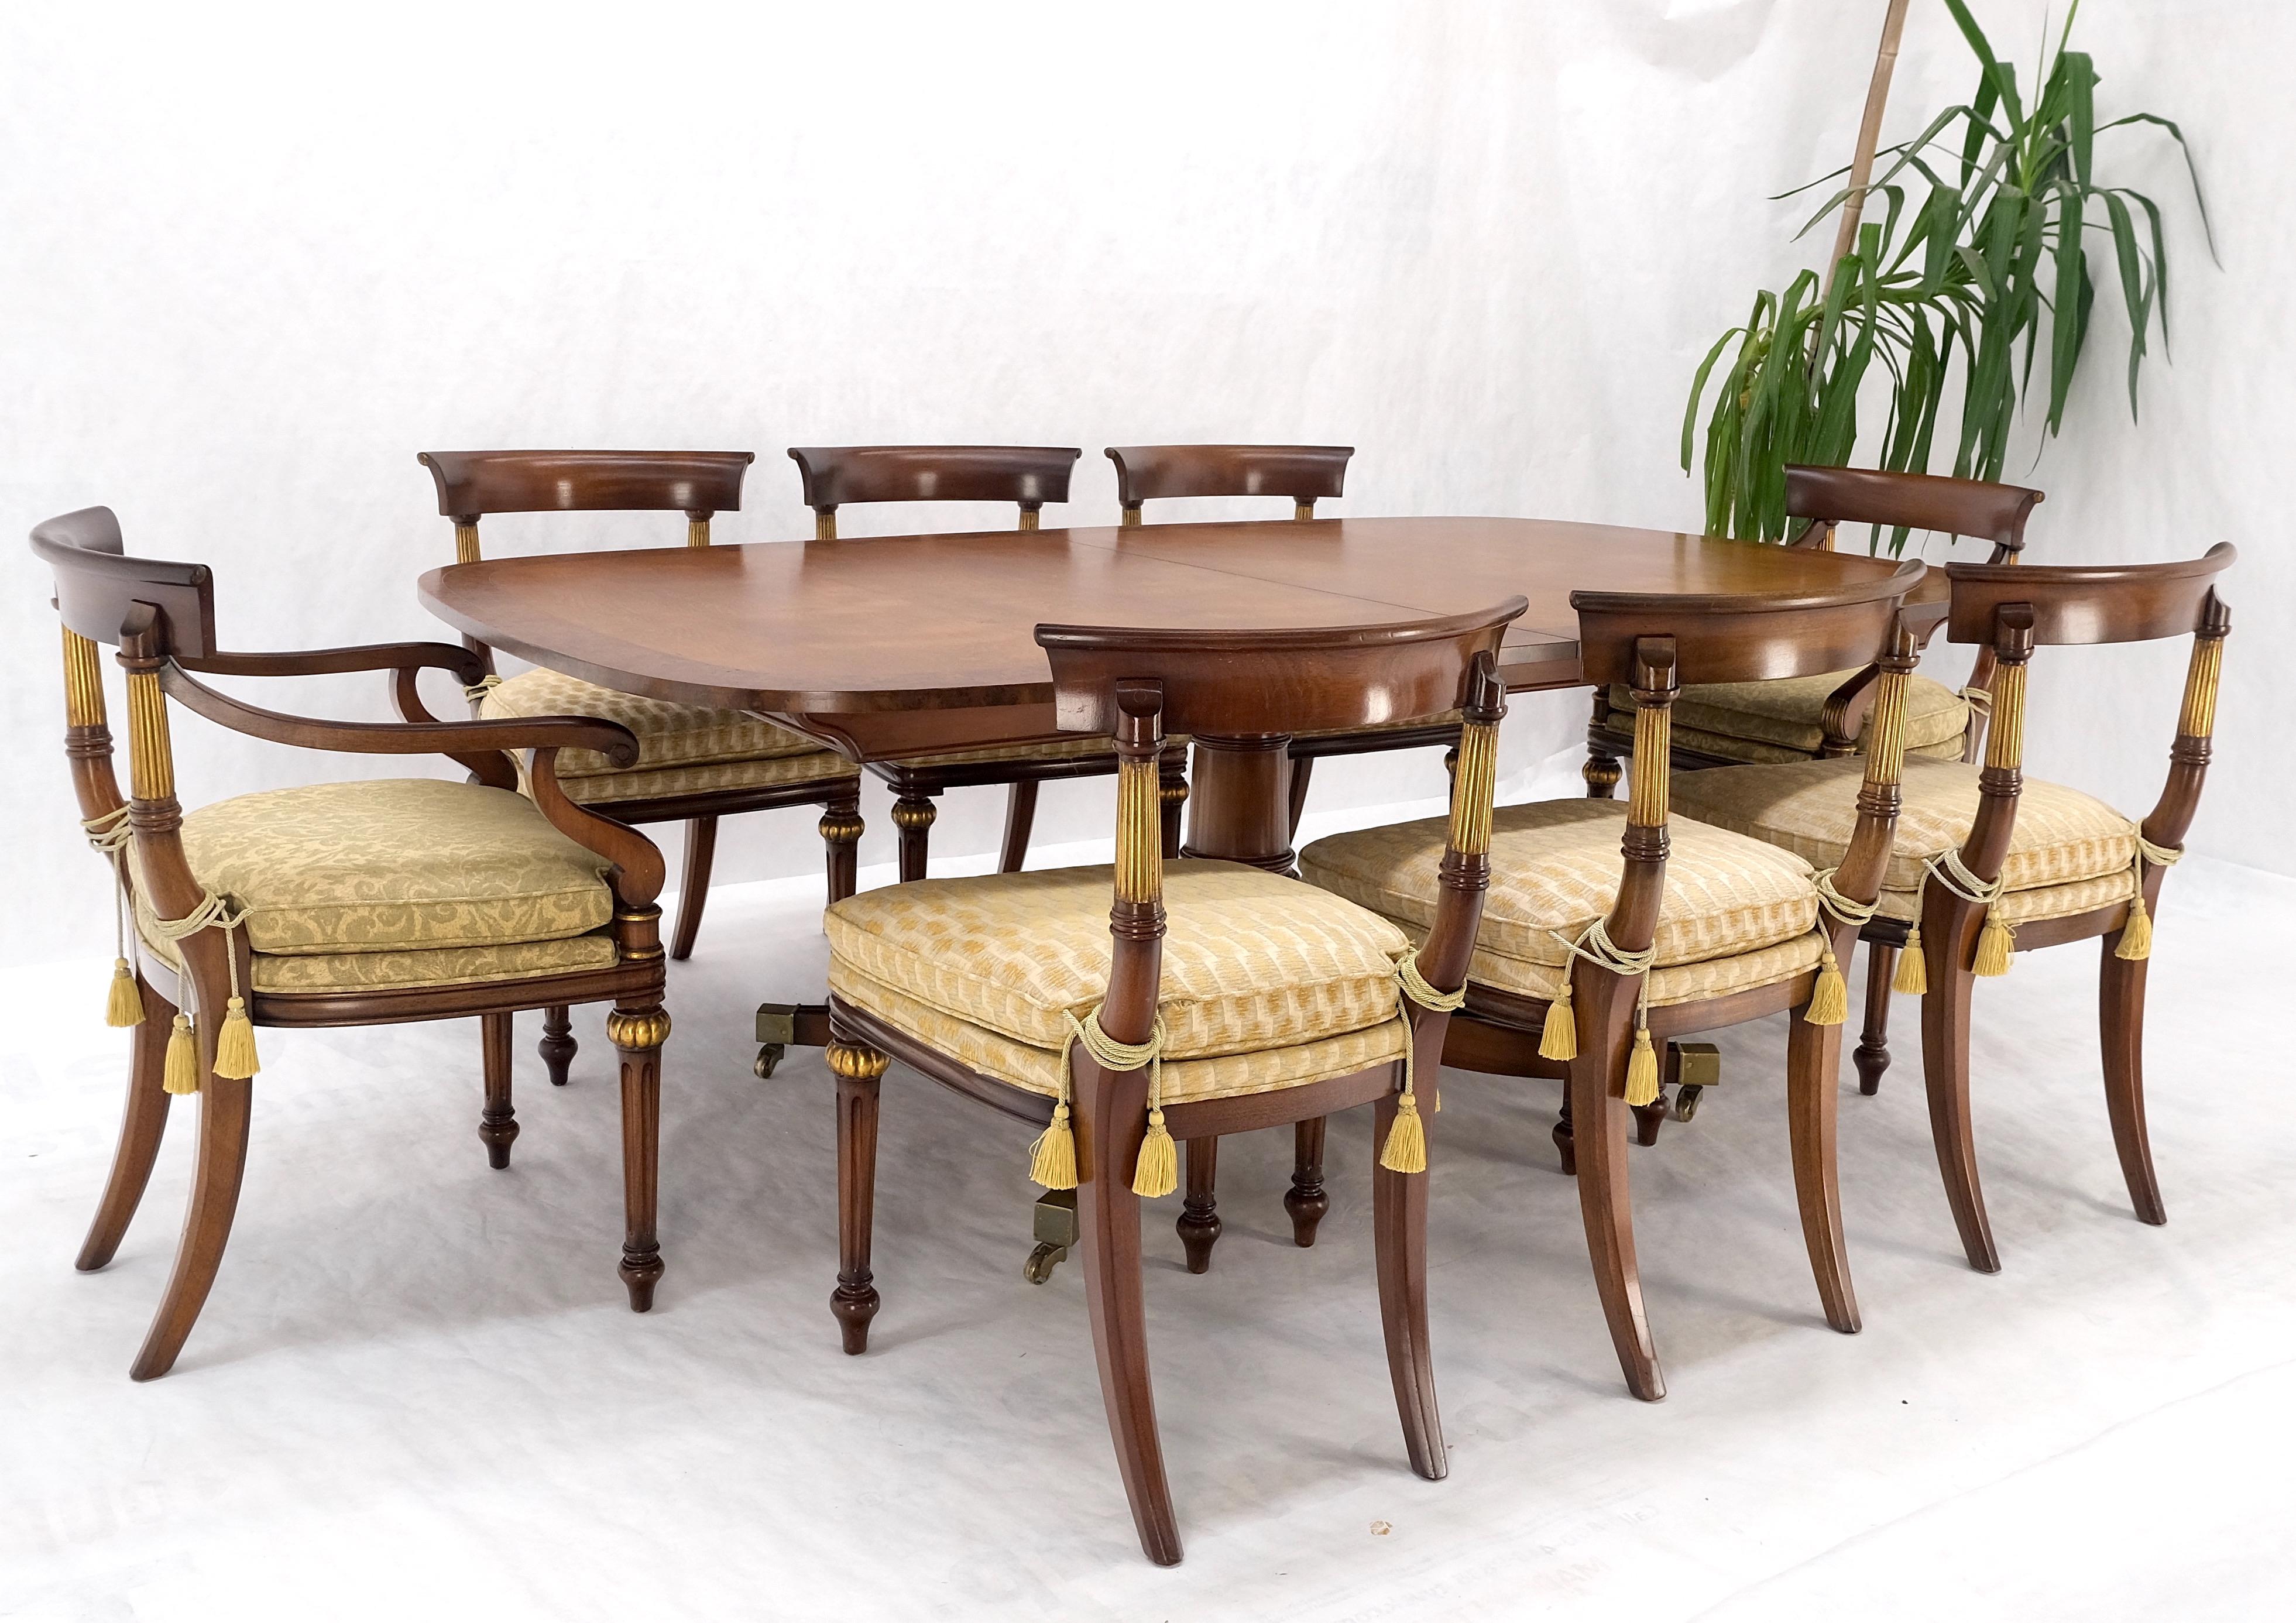 Single Pedestal One Leaf Oval Banded Dining Table 8 Regency Chairs Set MINT! For Sale 5